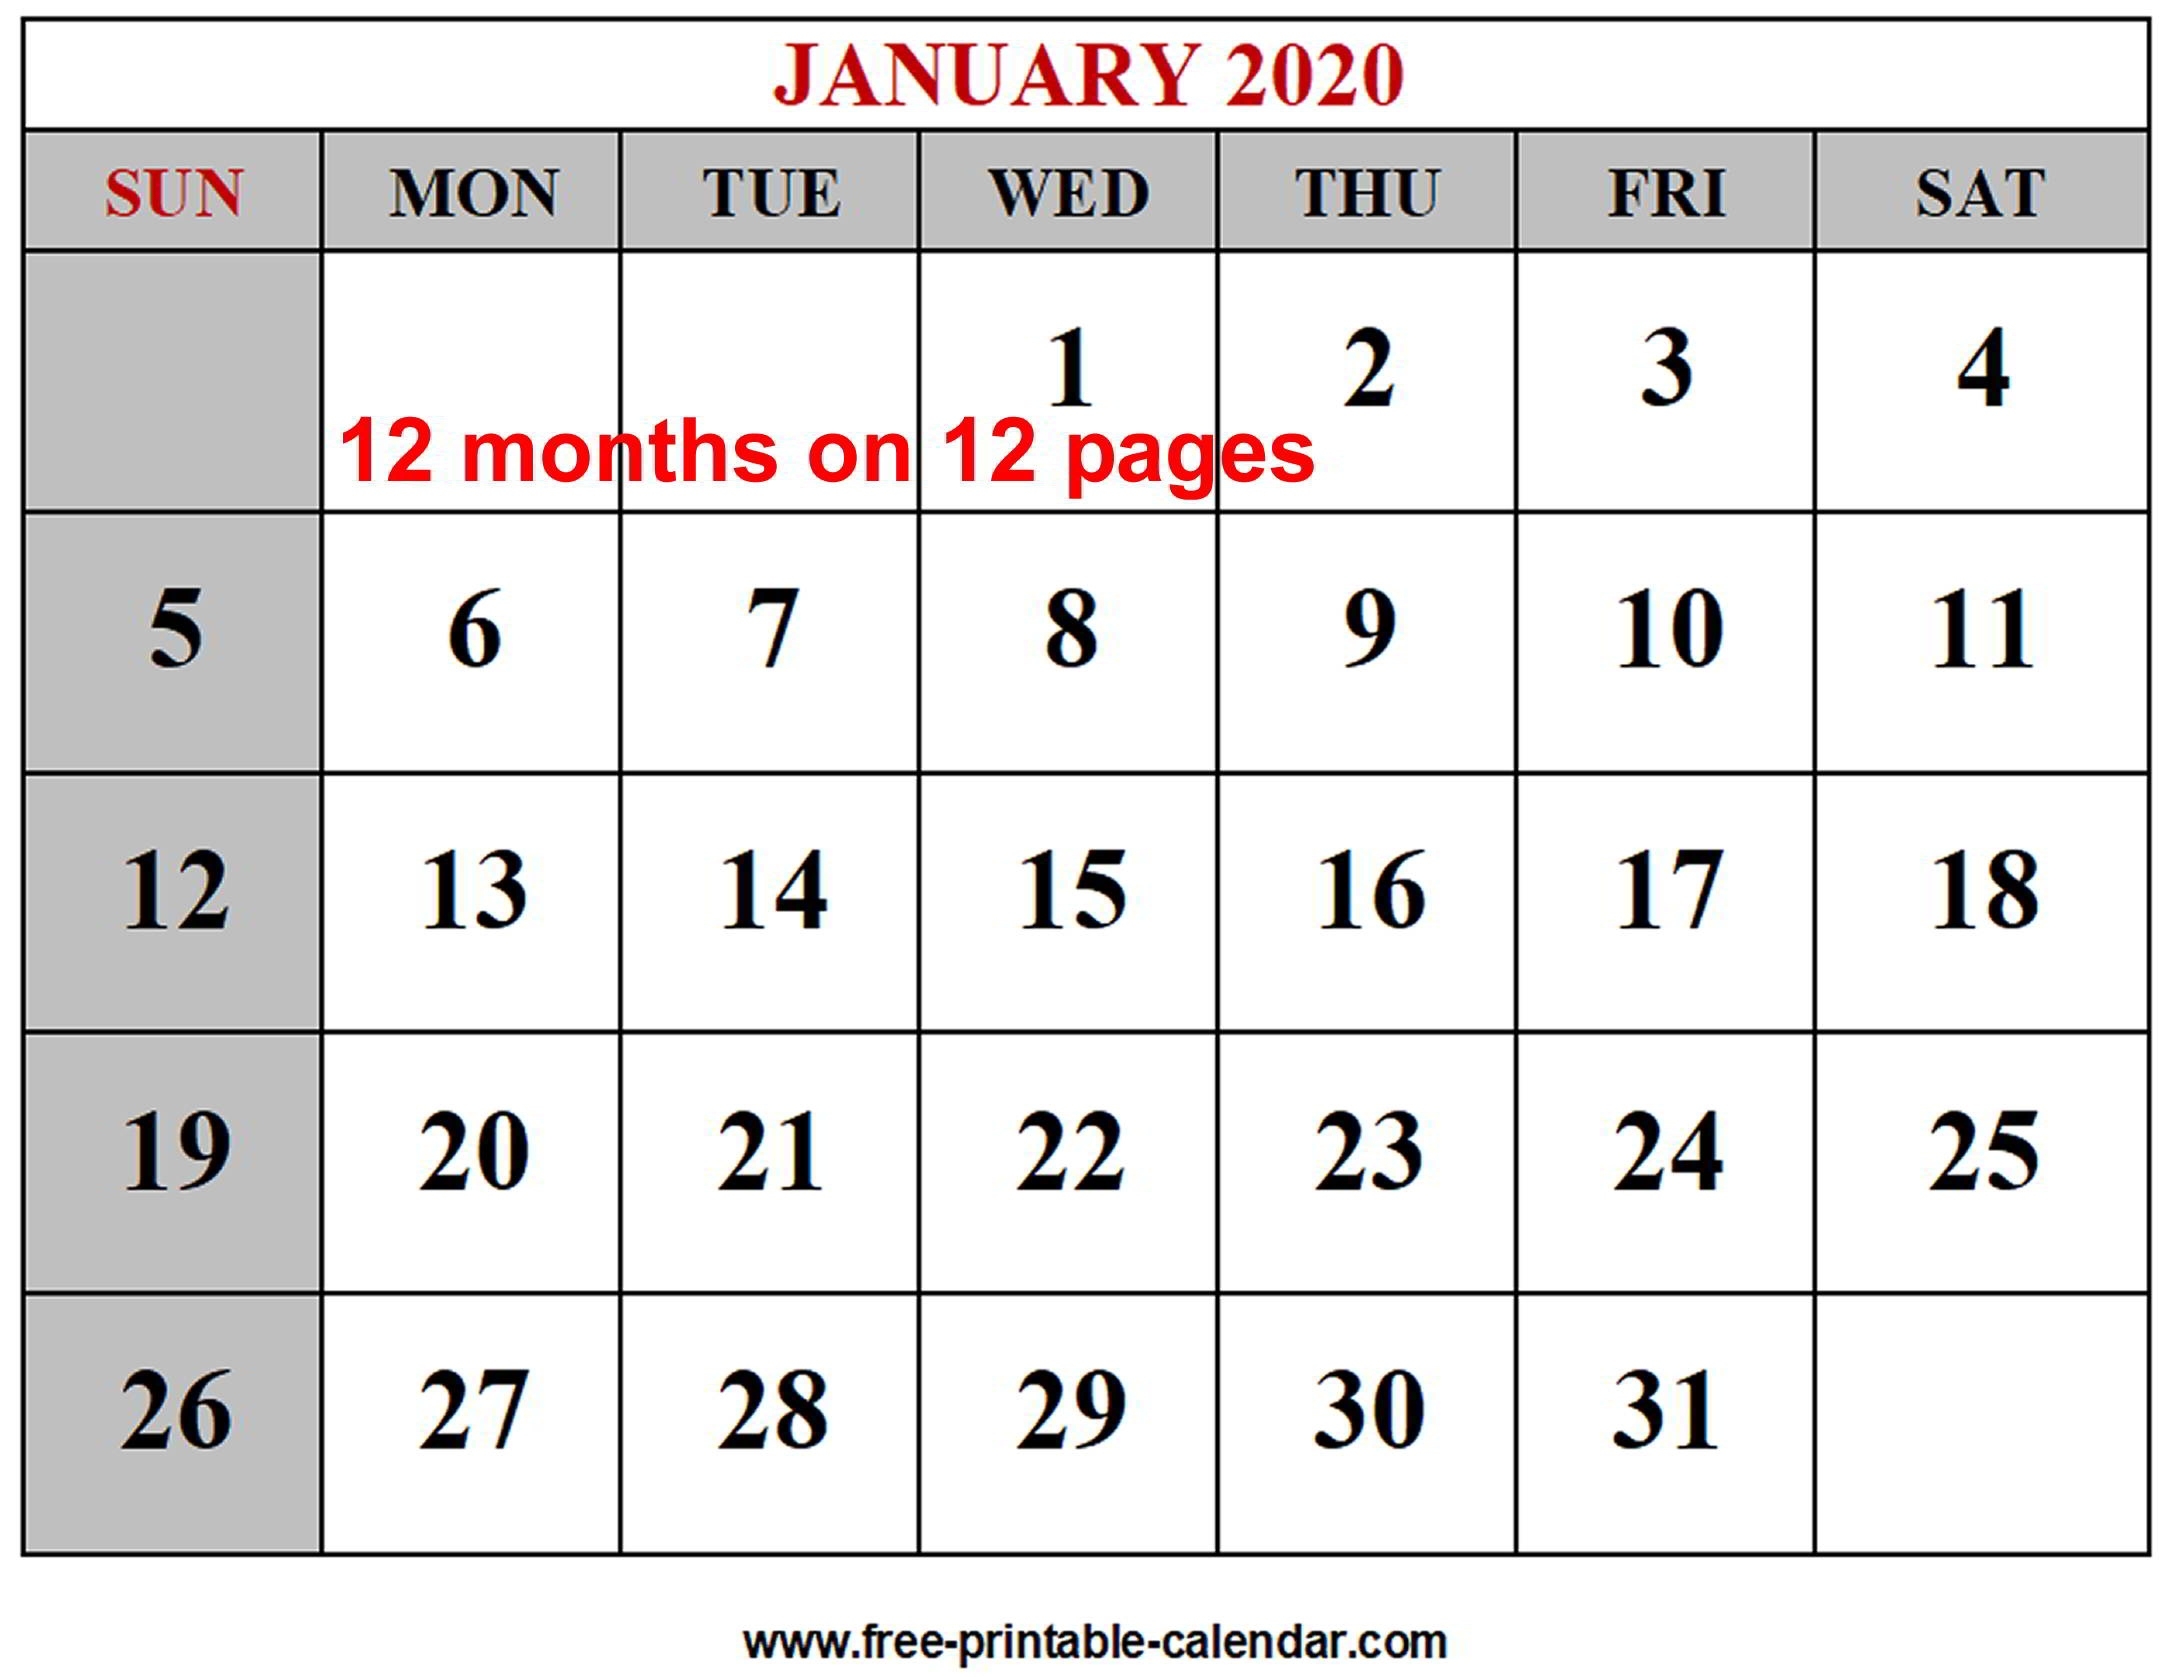 Year 2020 Calendar Templates - Free-Printable-Calendar Exceptional Printable Calenders For The Whole Year 2020